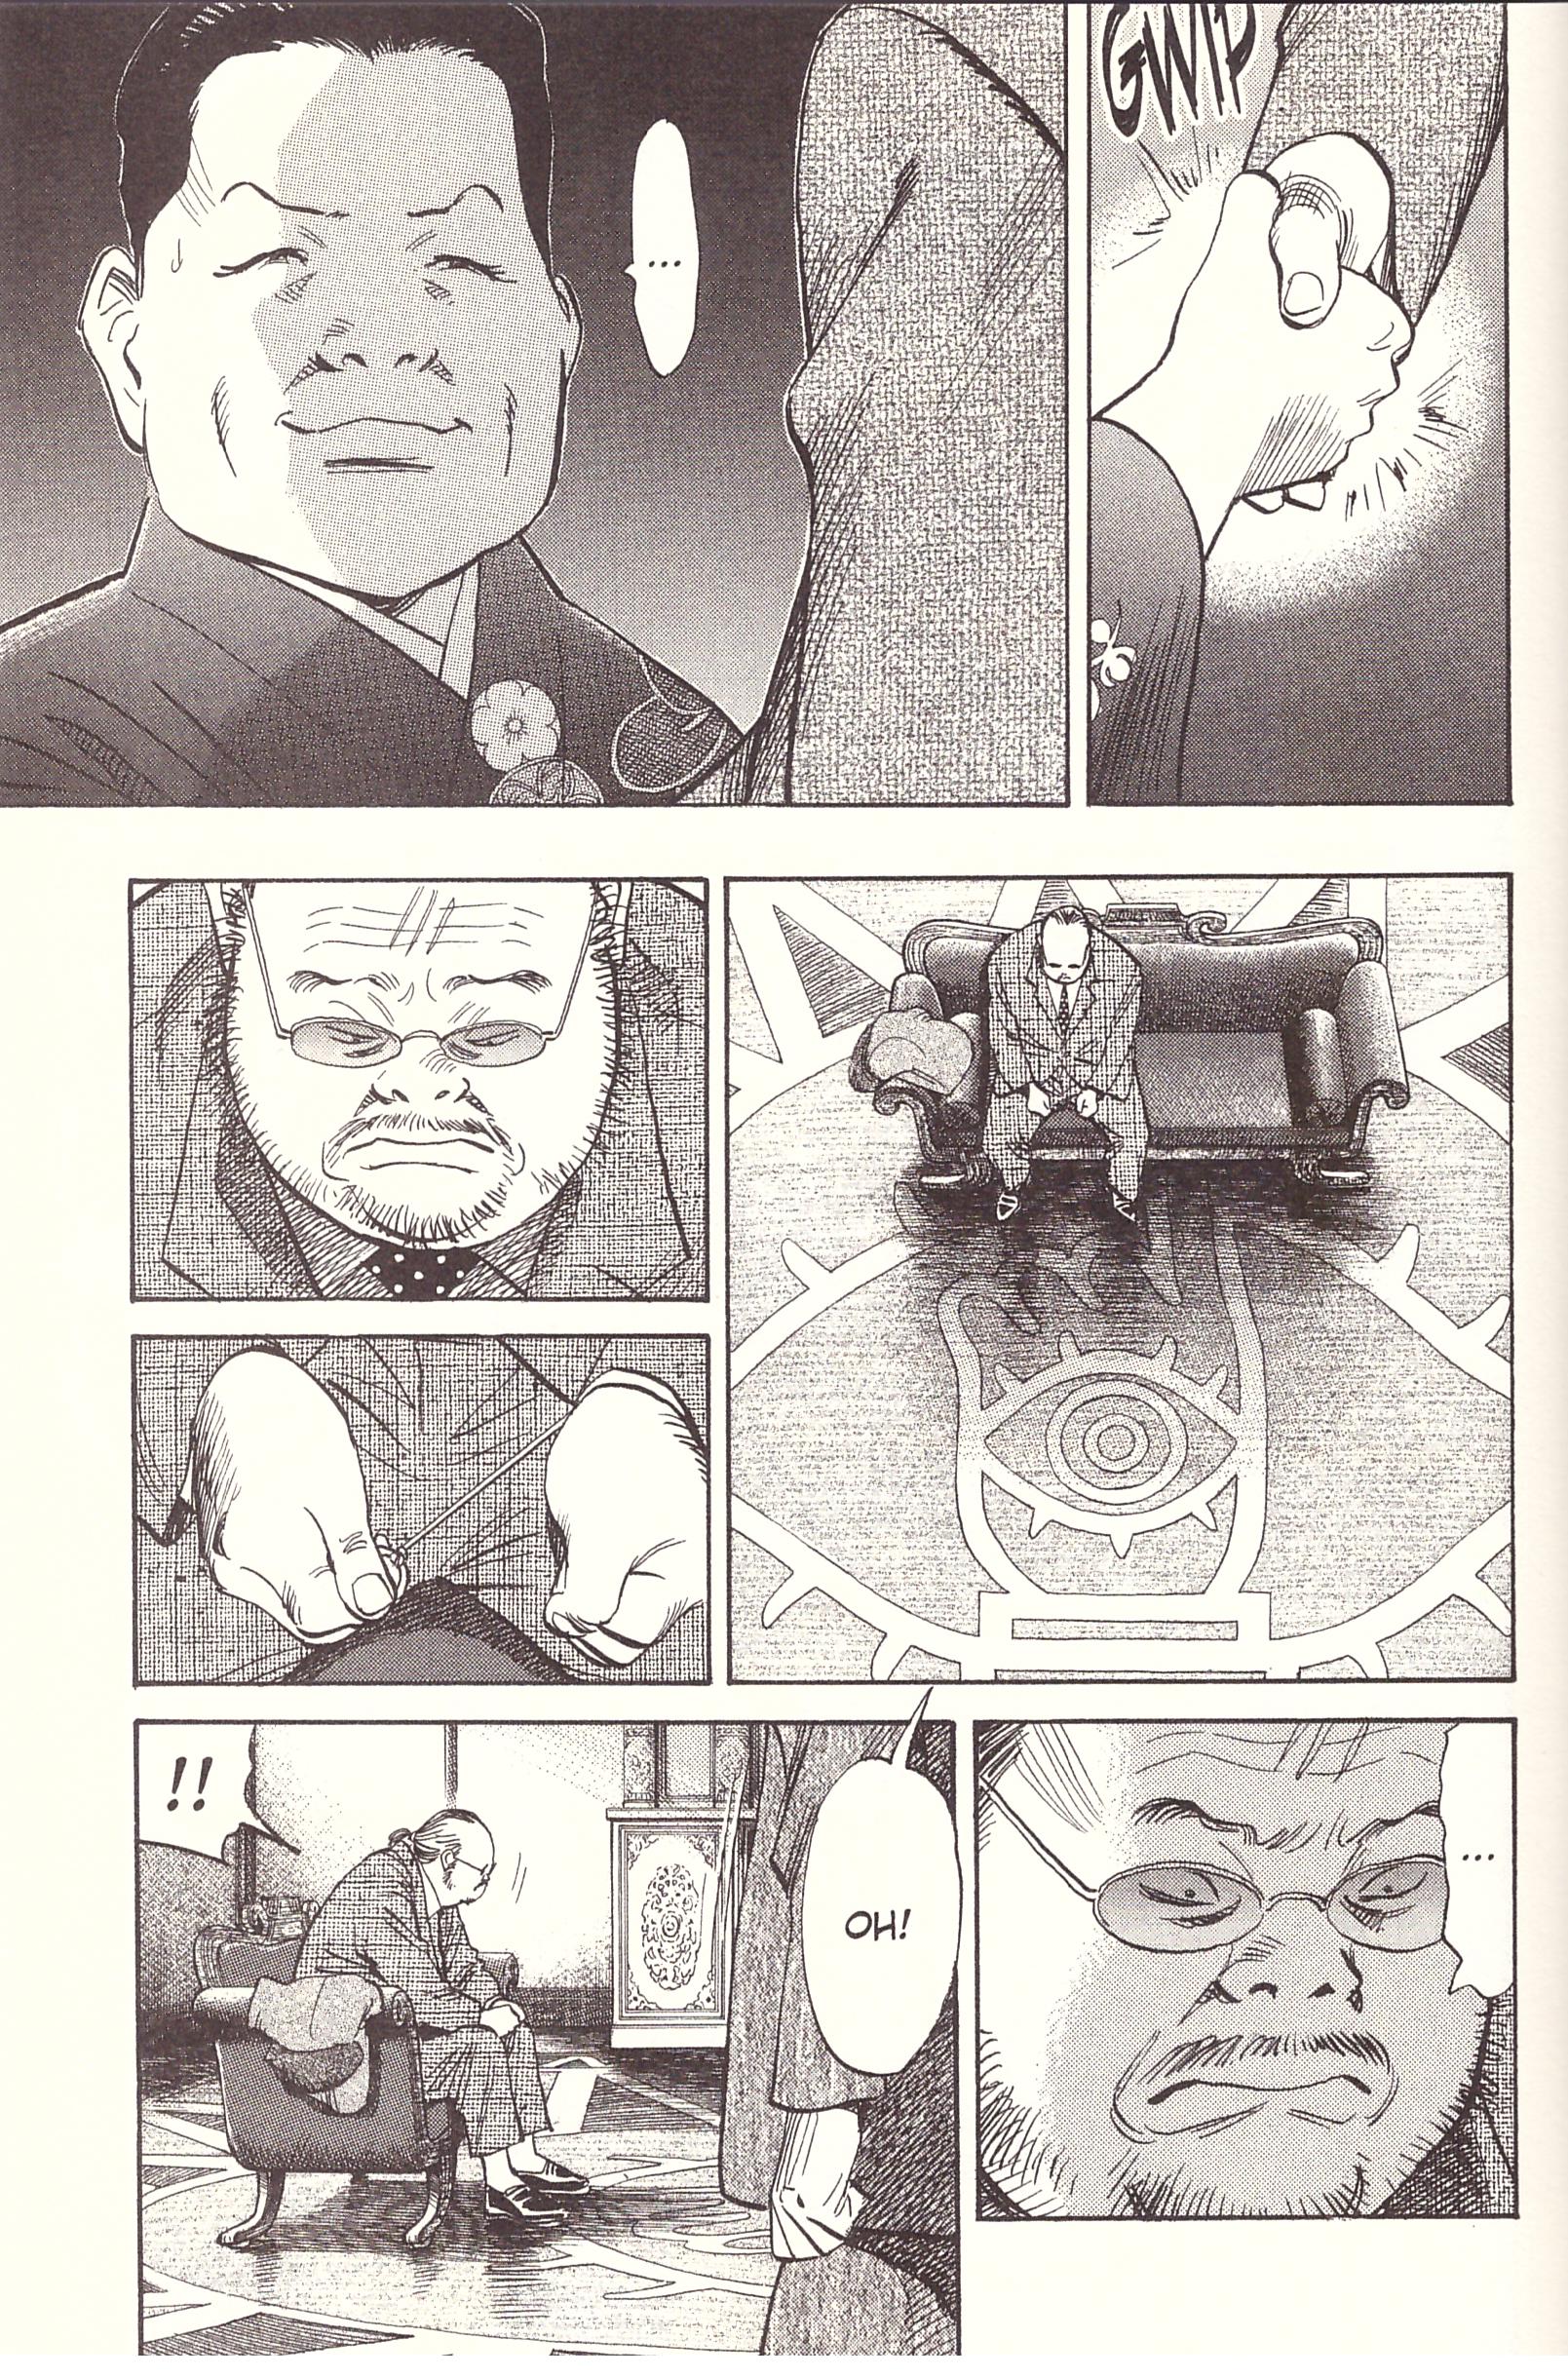 20th Century Boys The Pefect Edition Volume 6 review